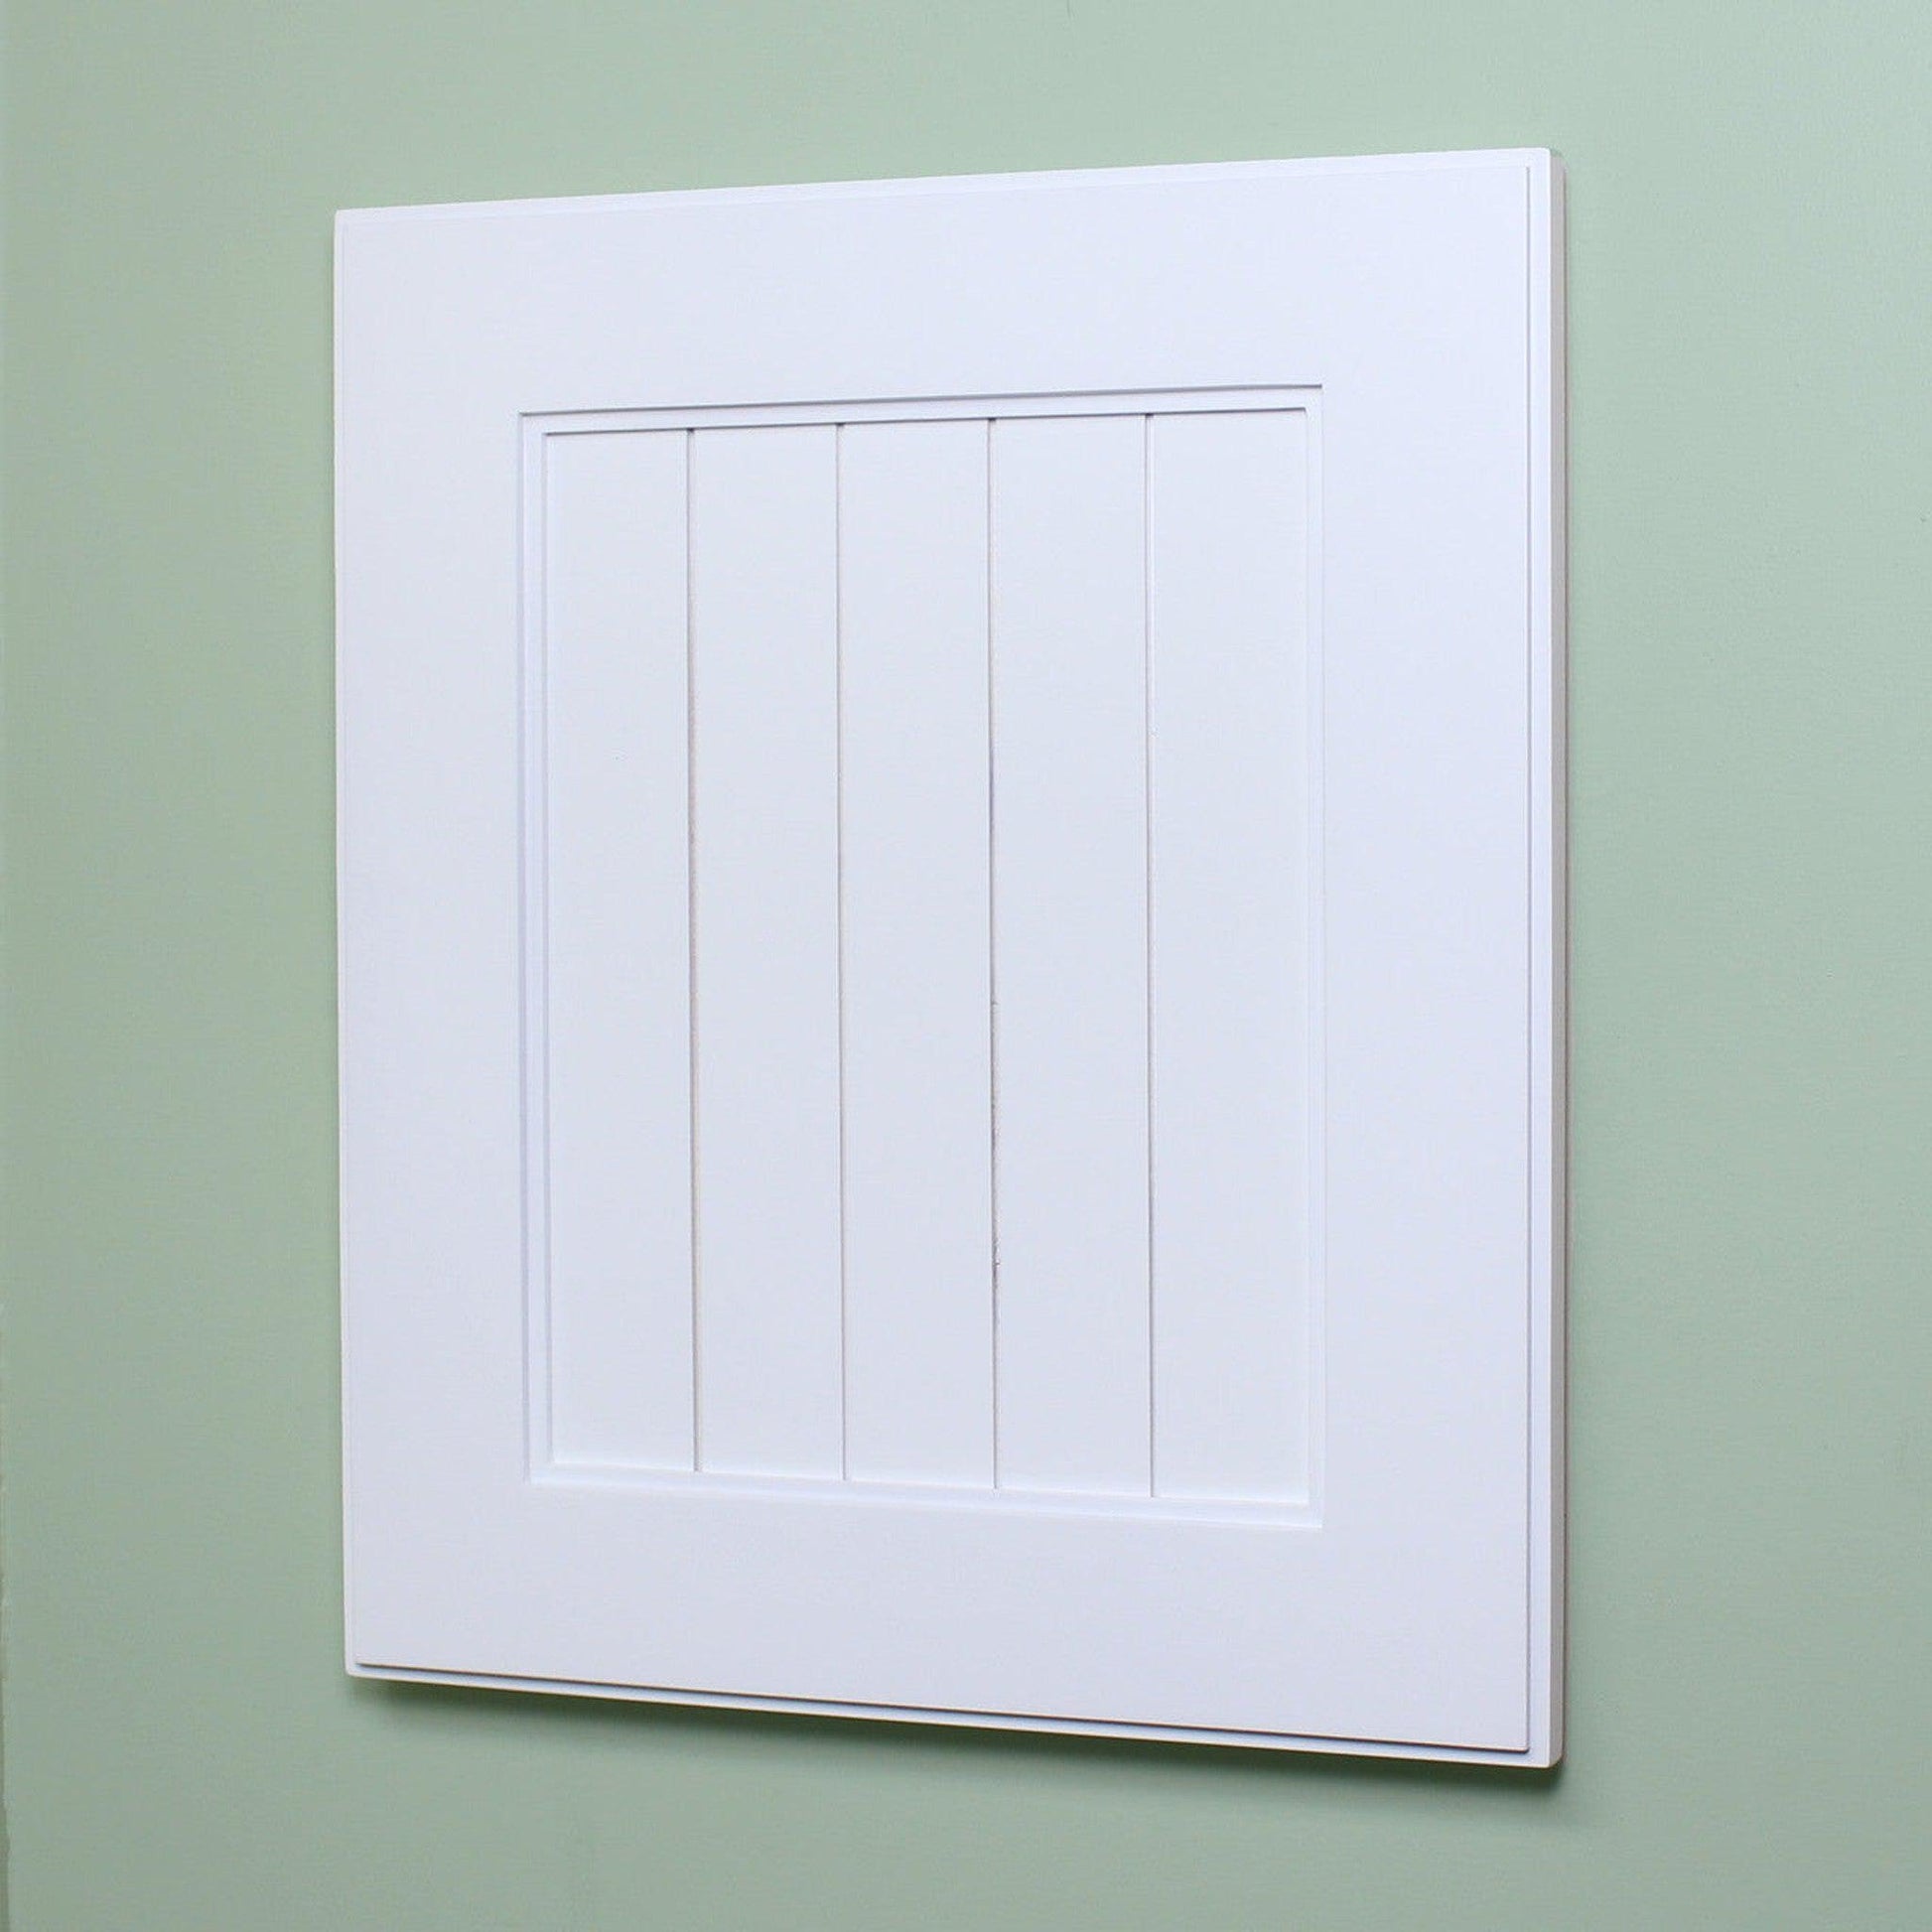 Fox Hollow Furnishings 14" x 18" White Shaker Beadboard White Interior Special 6" Depth Recessed Medicine Cabinet With Mirror